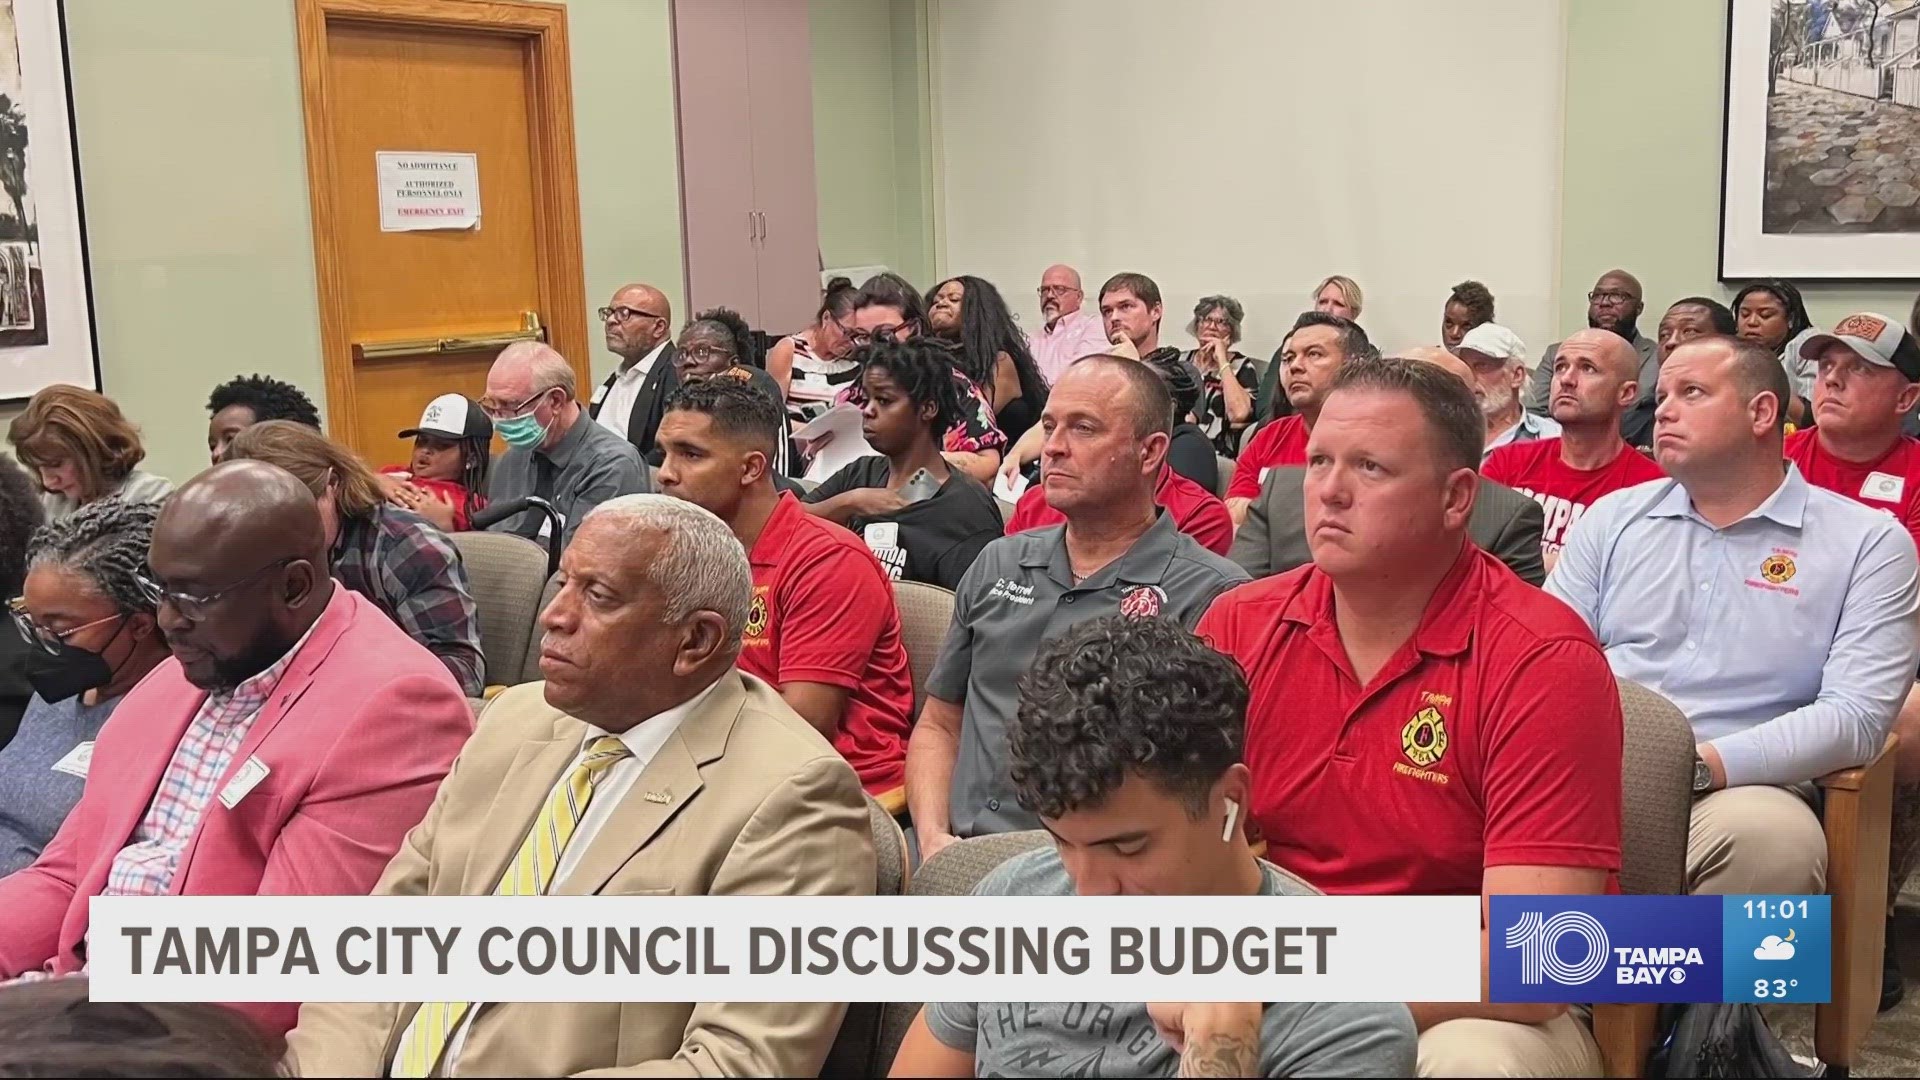 Tuesday night was the last chance for the public to weigh in on the proposal.